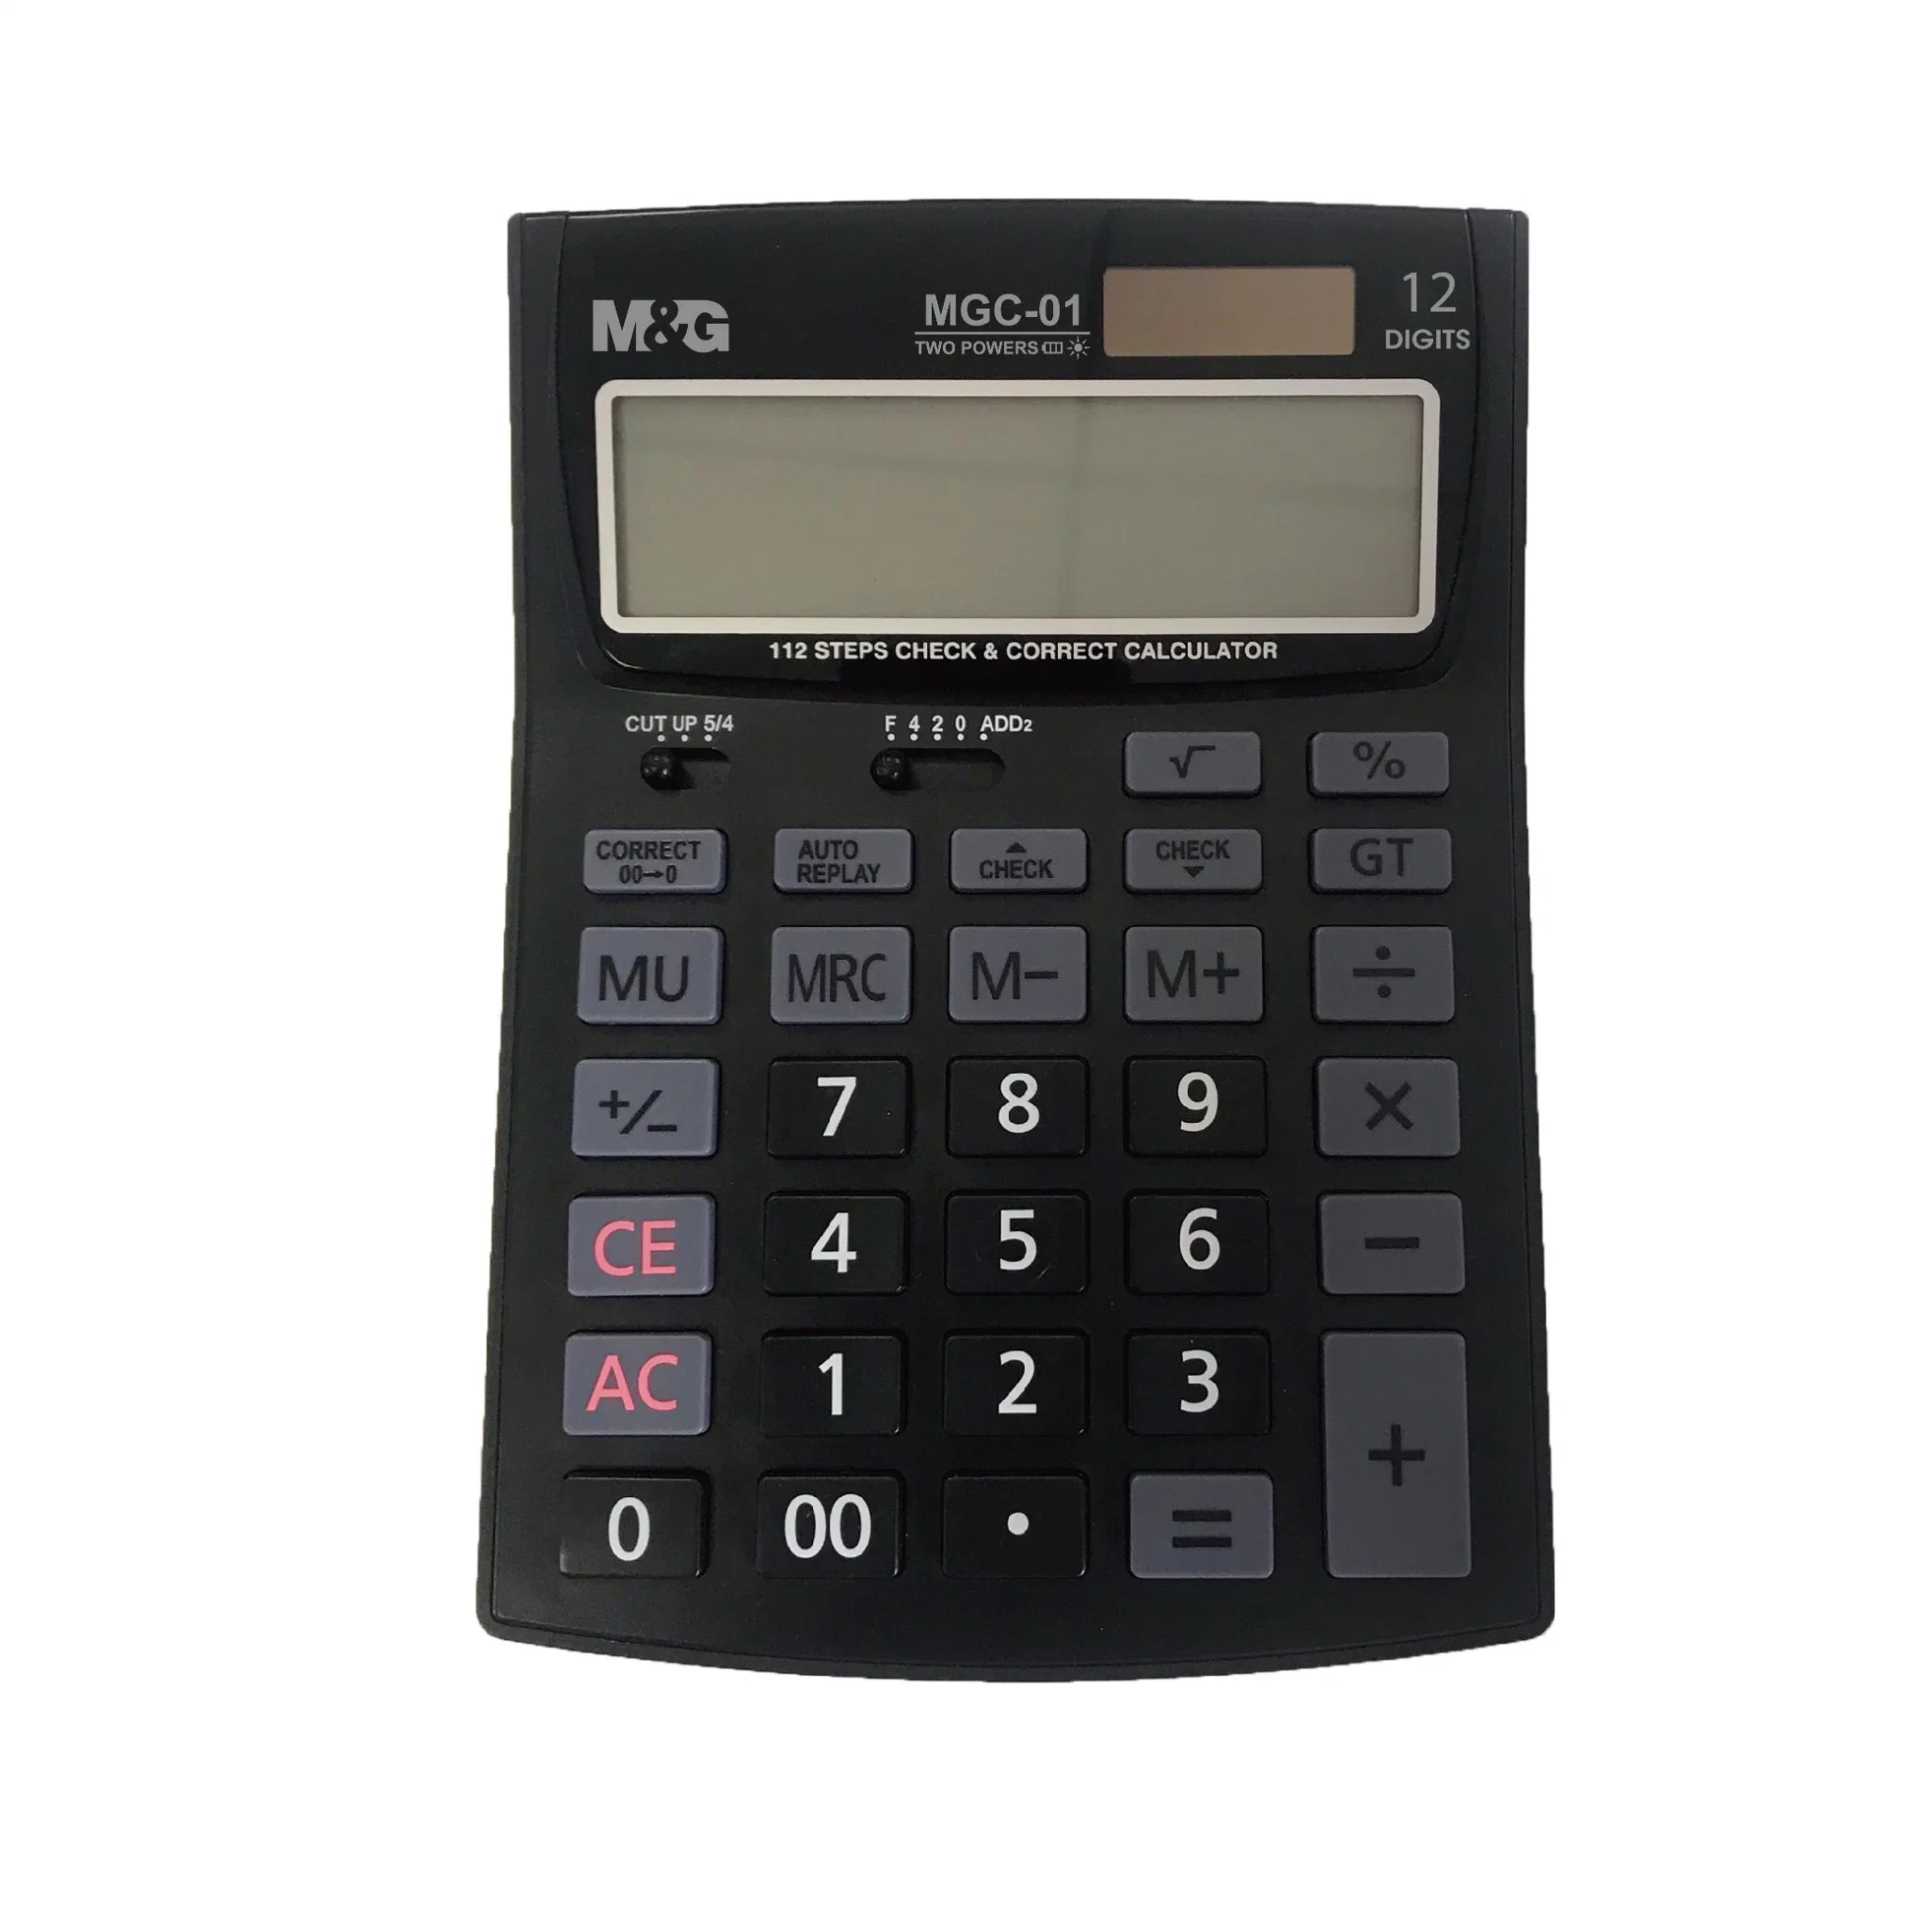 M&G Stationery Promotional Dual Power Supply 112 Steps Check Correct Calculator 12 Digits Calculator